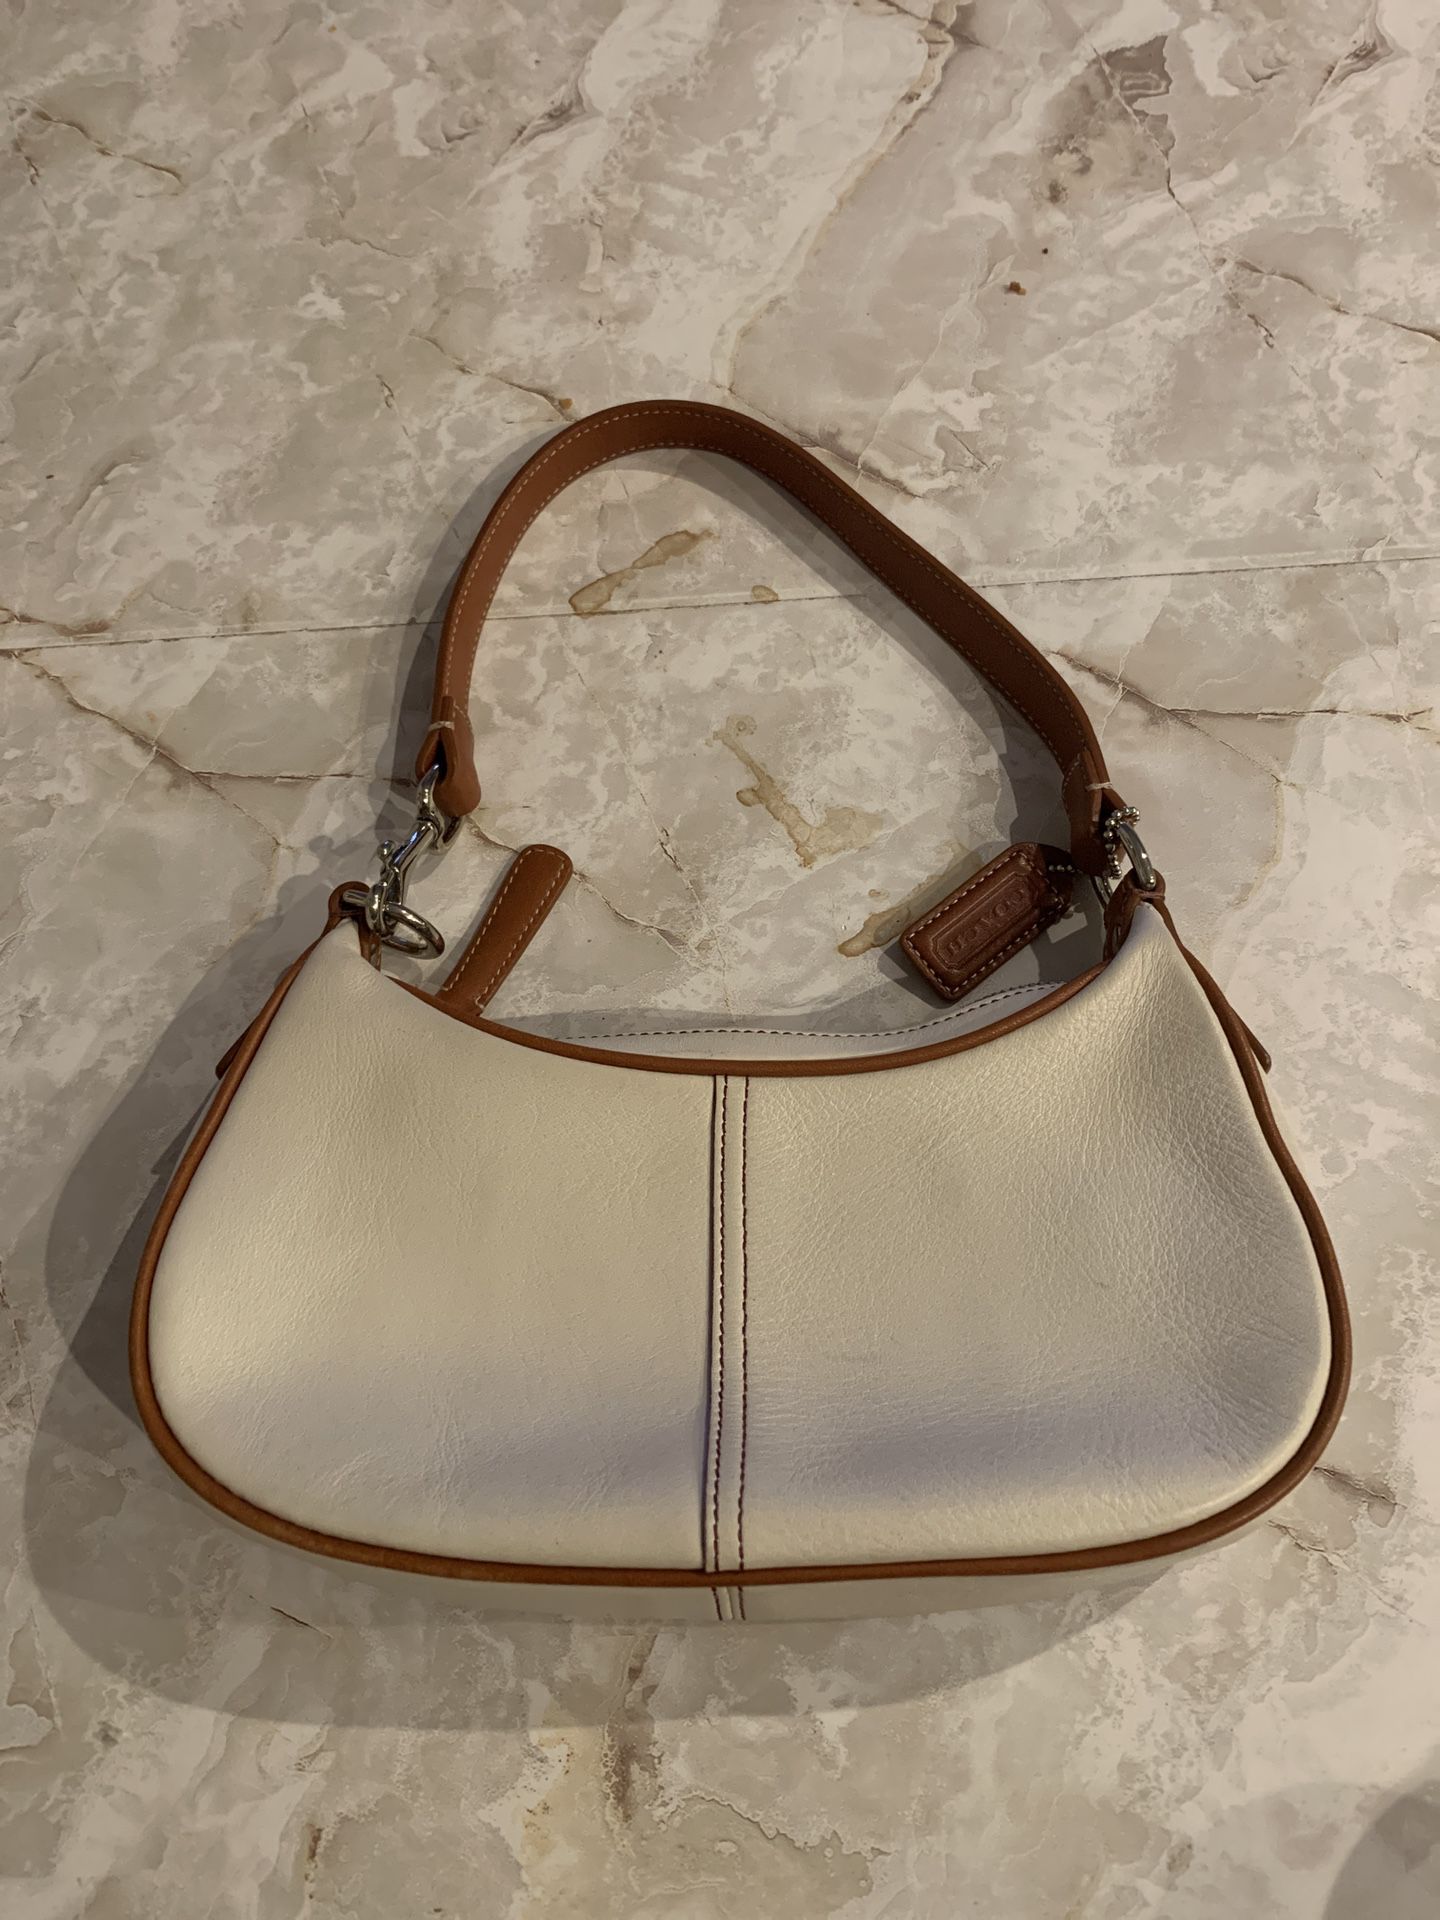 COACH HAMPTON DEMI RARE White VINTAGE LEATHER SMALL CONVERTIBLE PURSE  EXCELLENT for Sale in Fort Lauderdale, FL - OfferUp